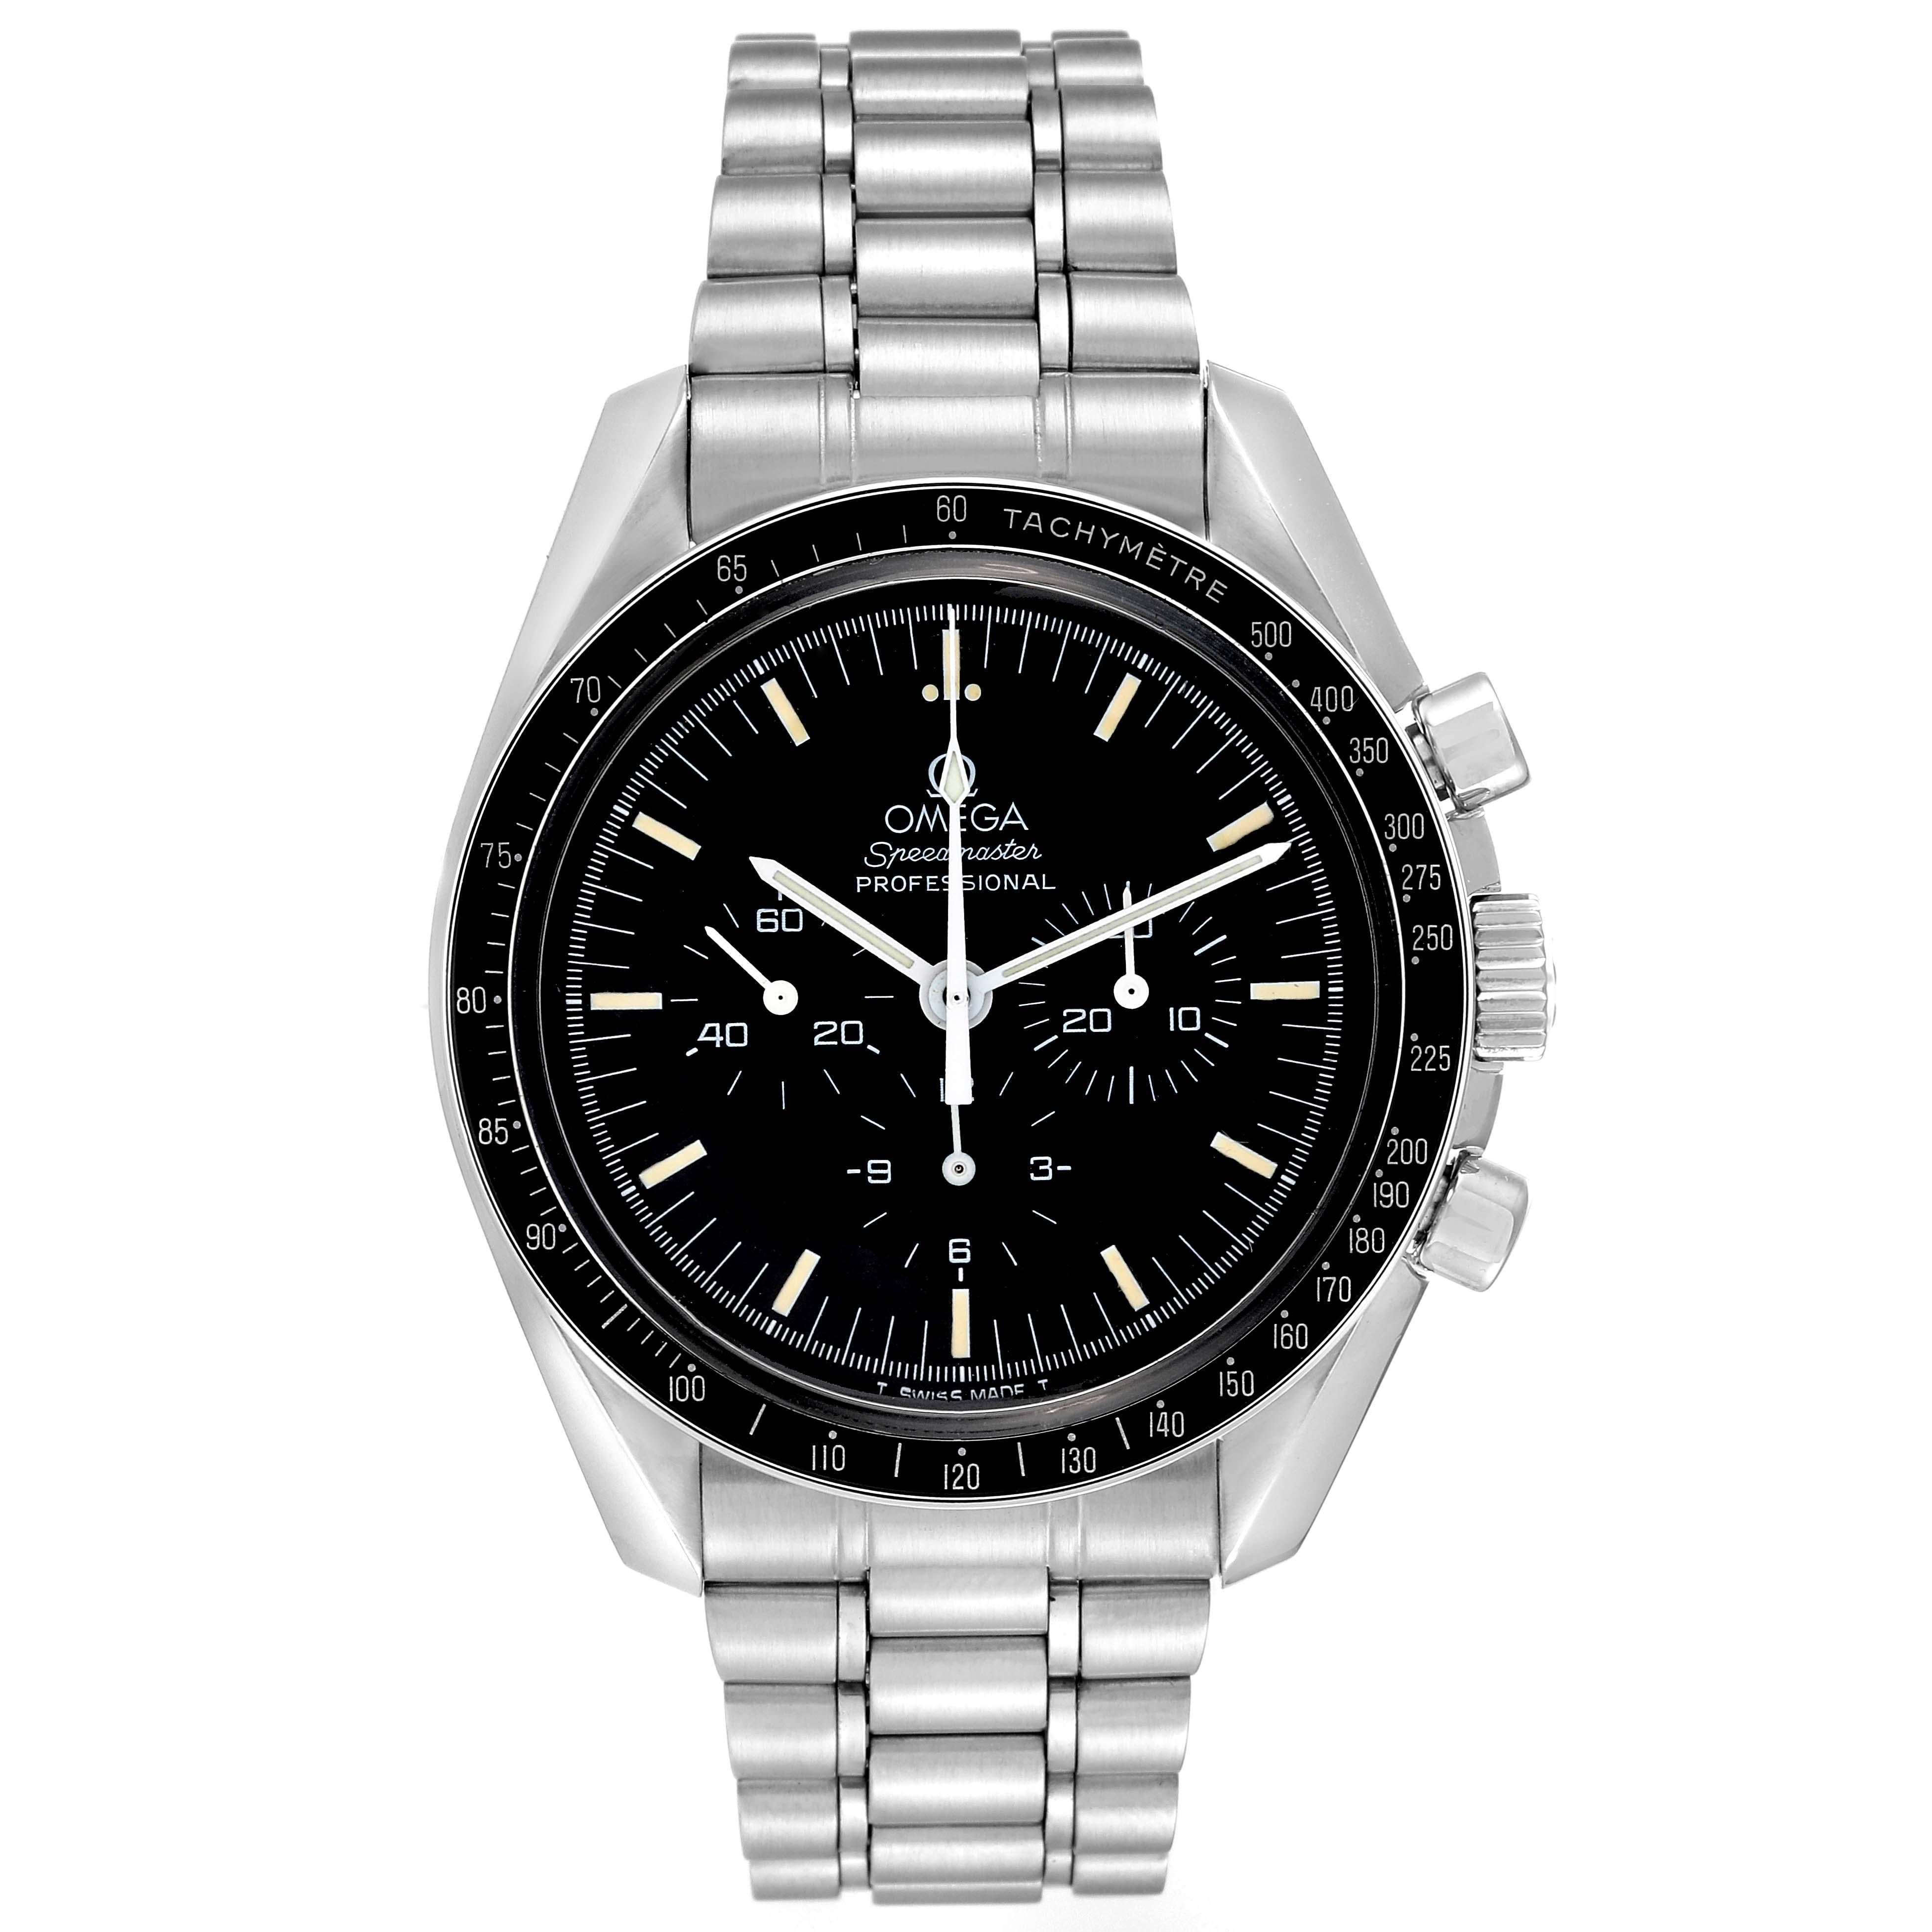 Omega Speedmaster Professional Moonwatch Steel Mens Watch 3592.50.00 Box Card. Manual winding chronograph movement. Stainless steel round case 42.0 mm in diameter. Exhibition transparent sapphire crystal caseback. Black bezel with tachymeter